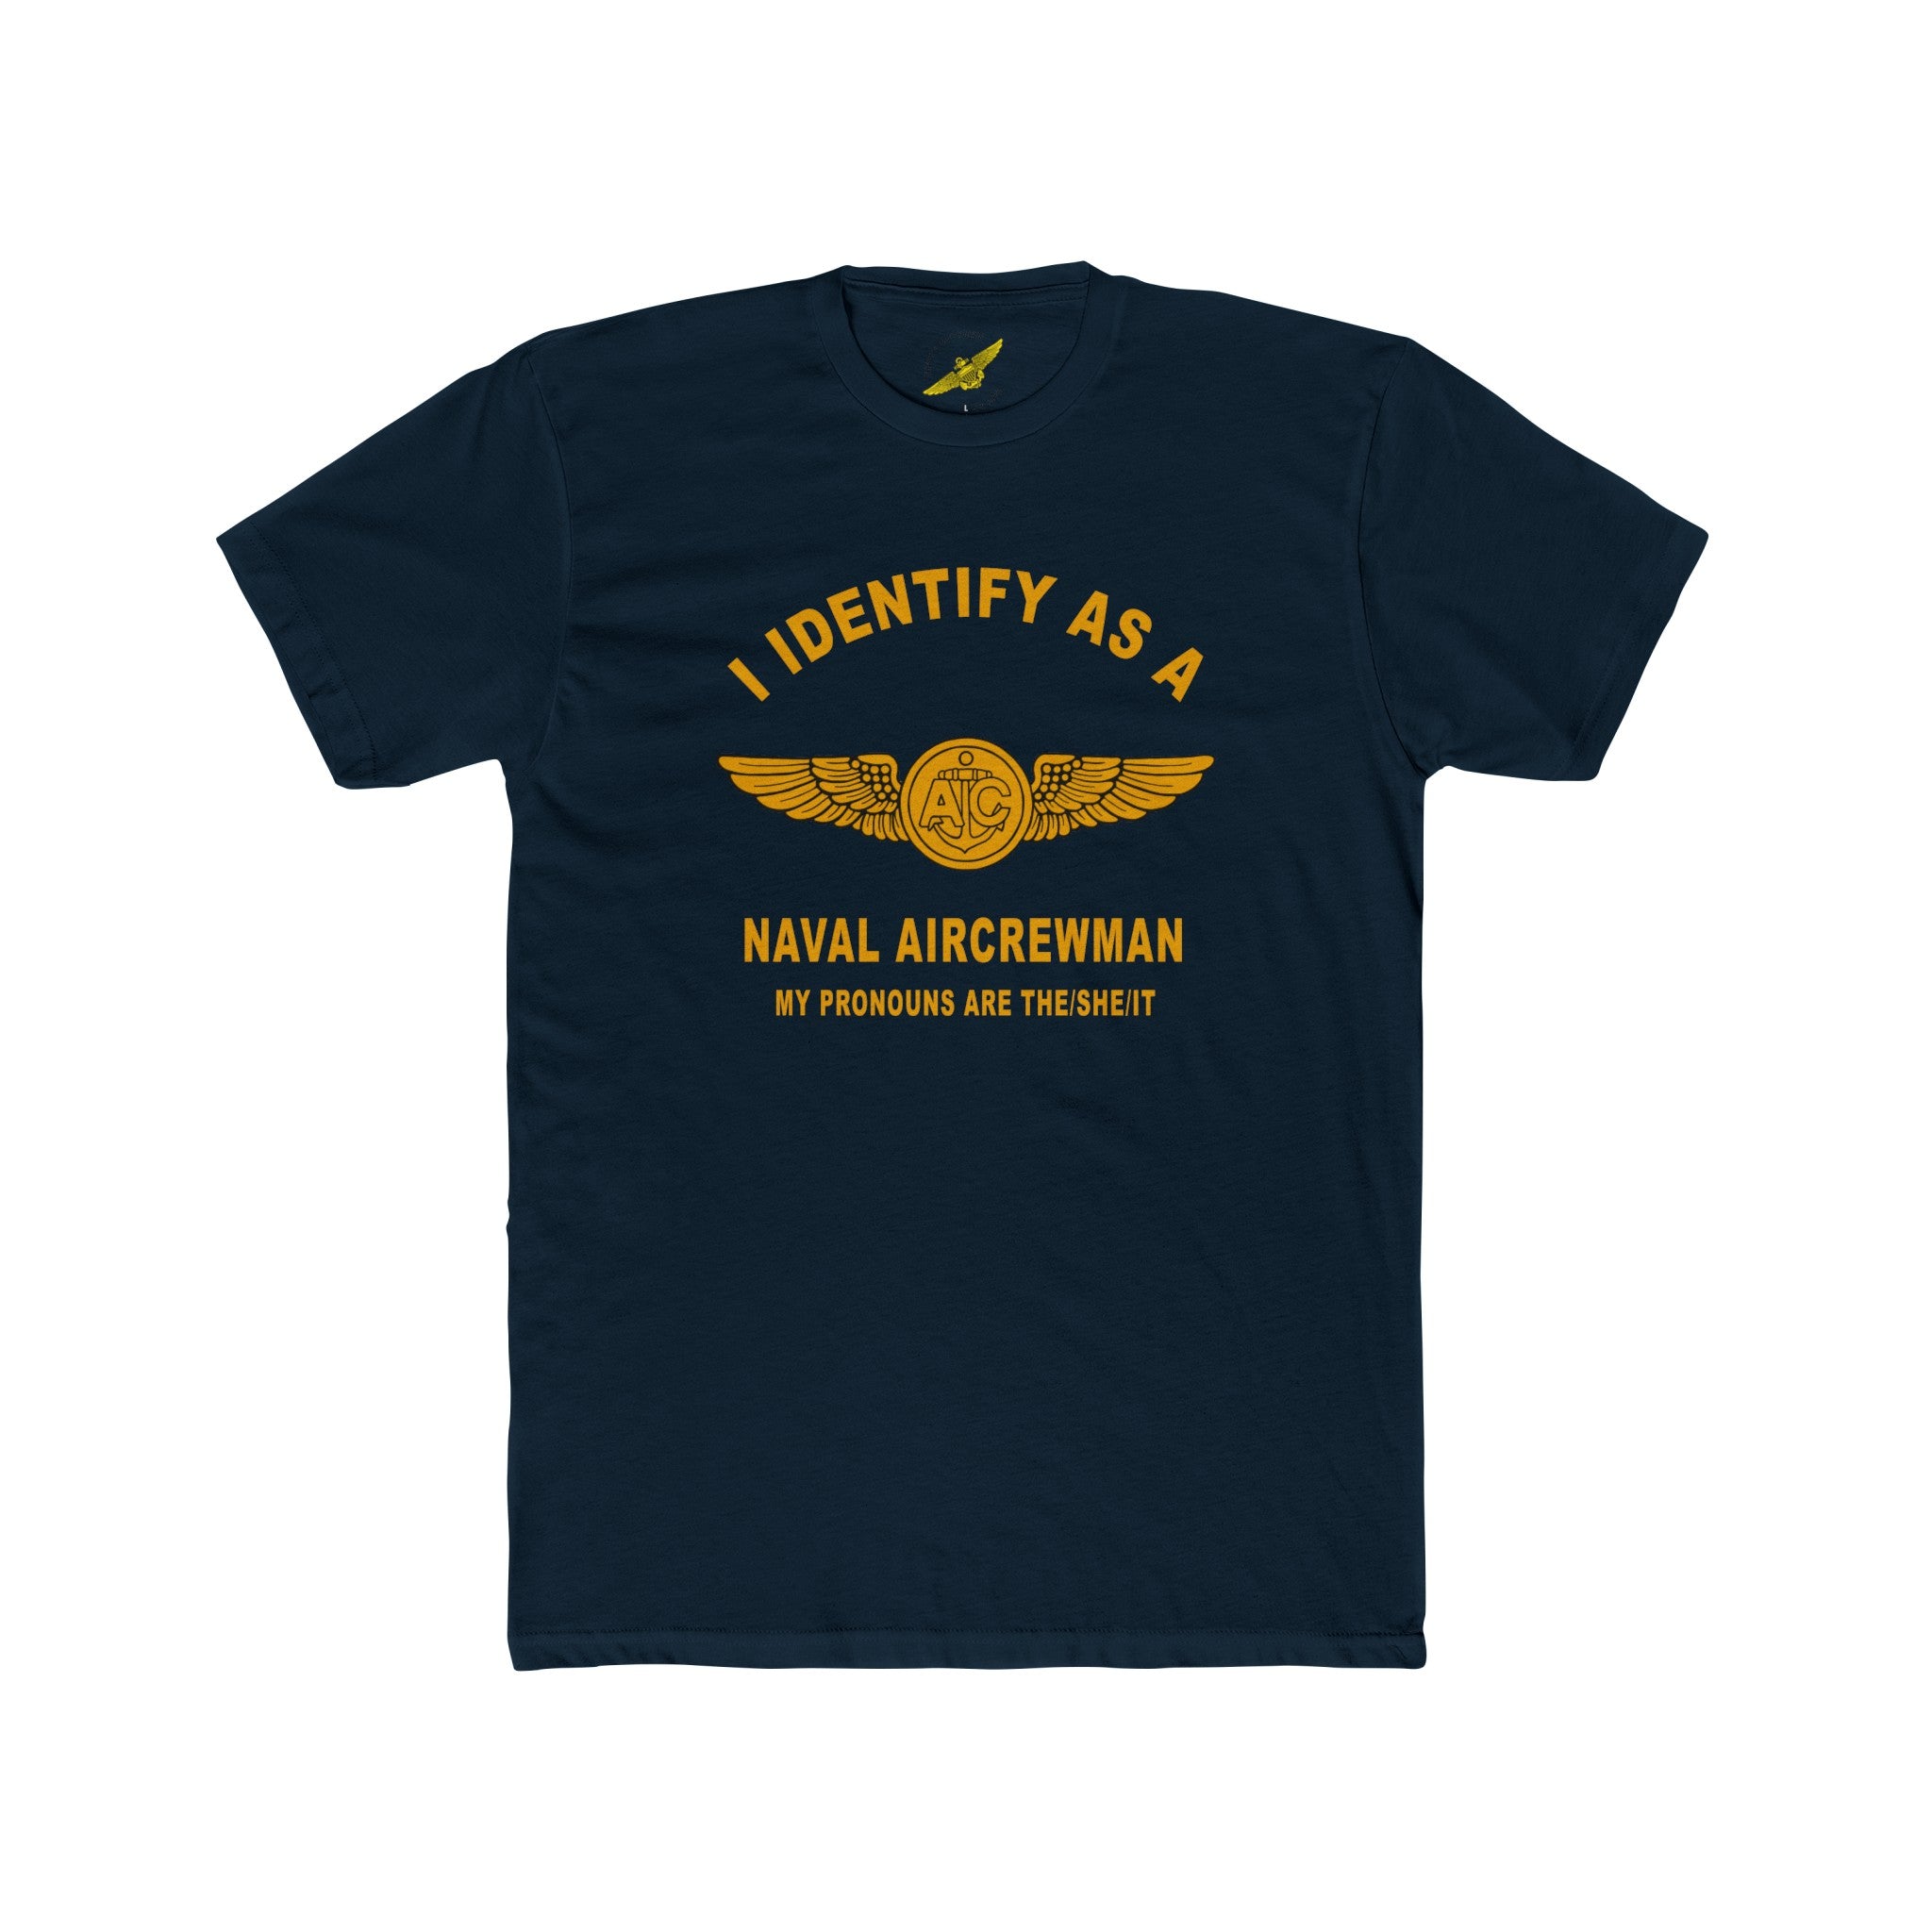 I Identify as a Naval Aircrewman T-Shirt - Show Your Aviation Pride!